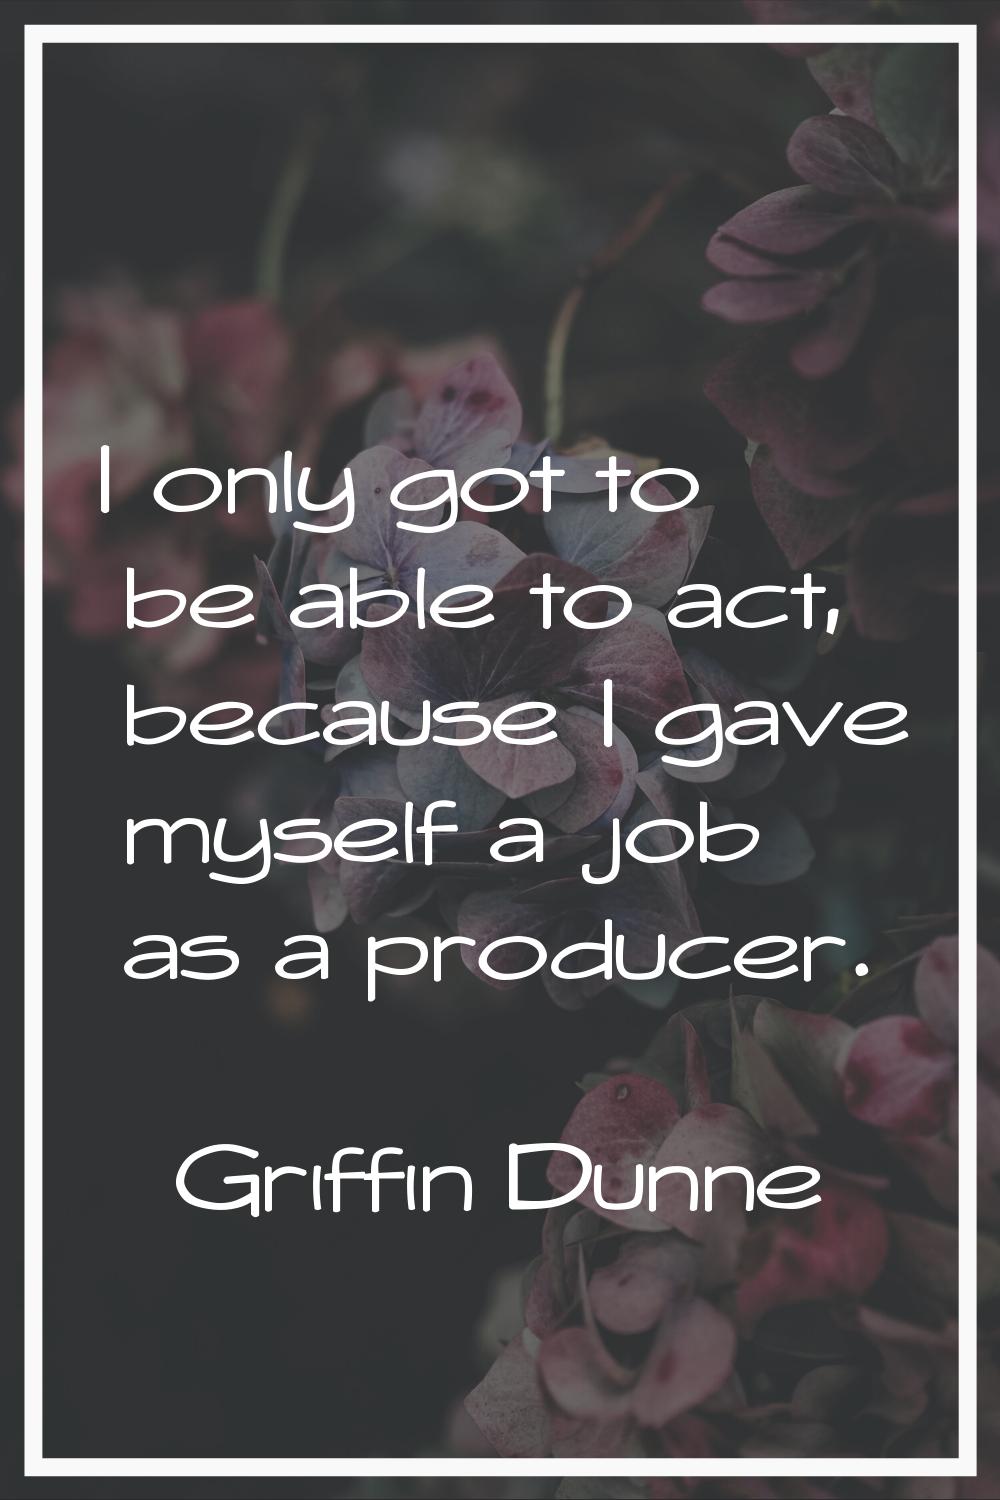 I only got to be able to act, because I gave myself a job as a producer.